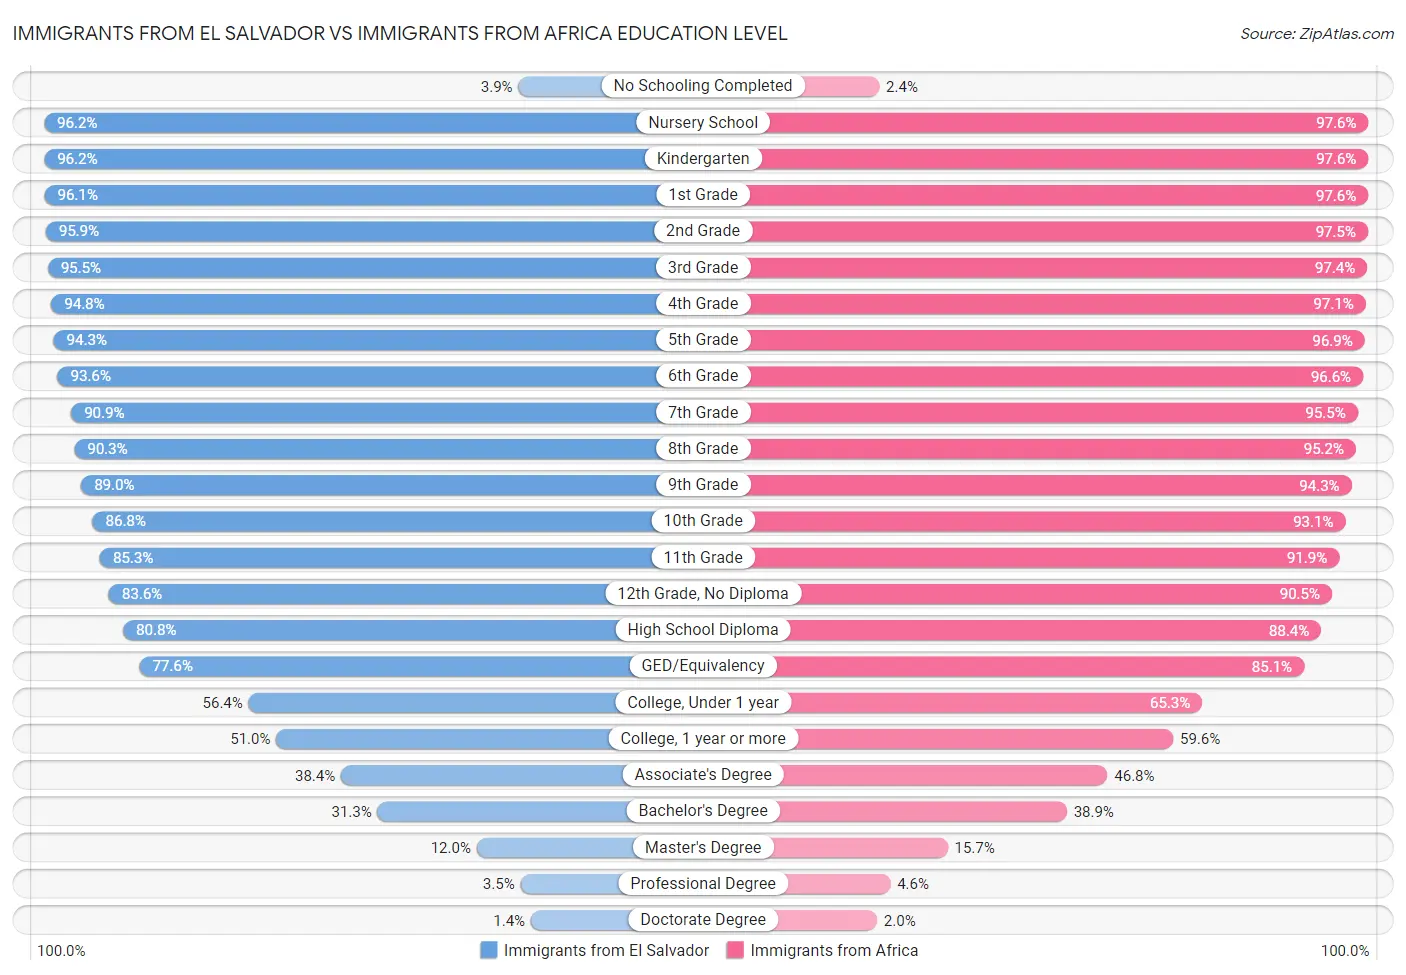 Immigrants from El Salvador vs Immigrants from Africa Education Level